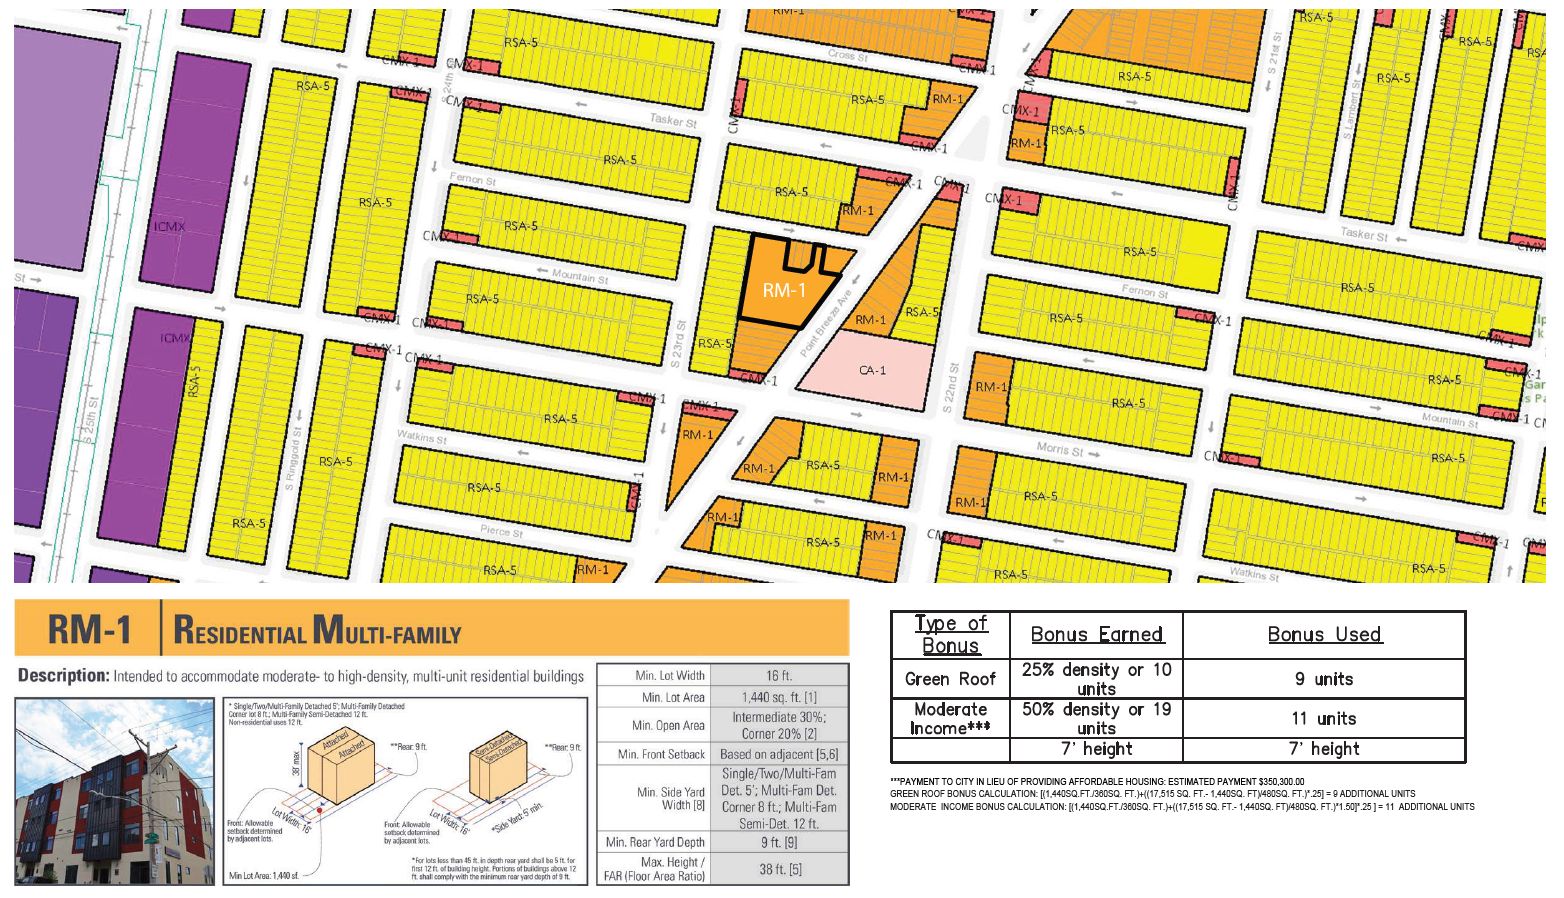 1622-40 Point Breeze Avenue. Zoning map. Credit: JKRP Architects via the Civic Design Review